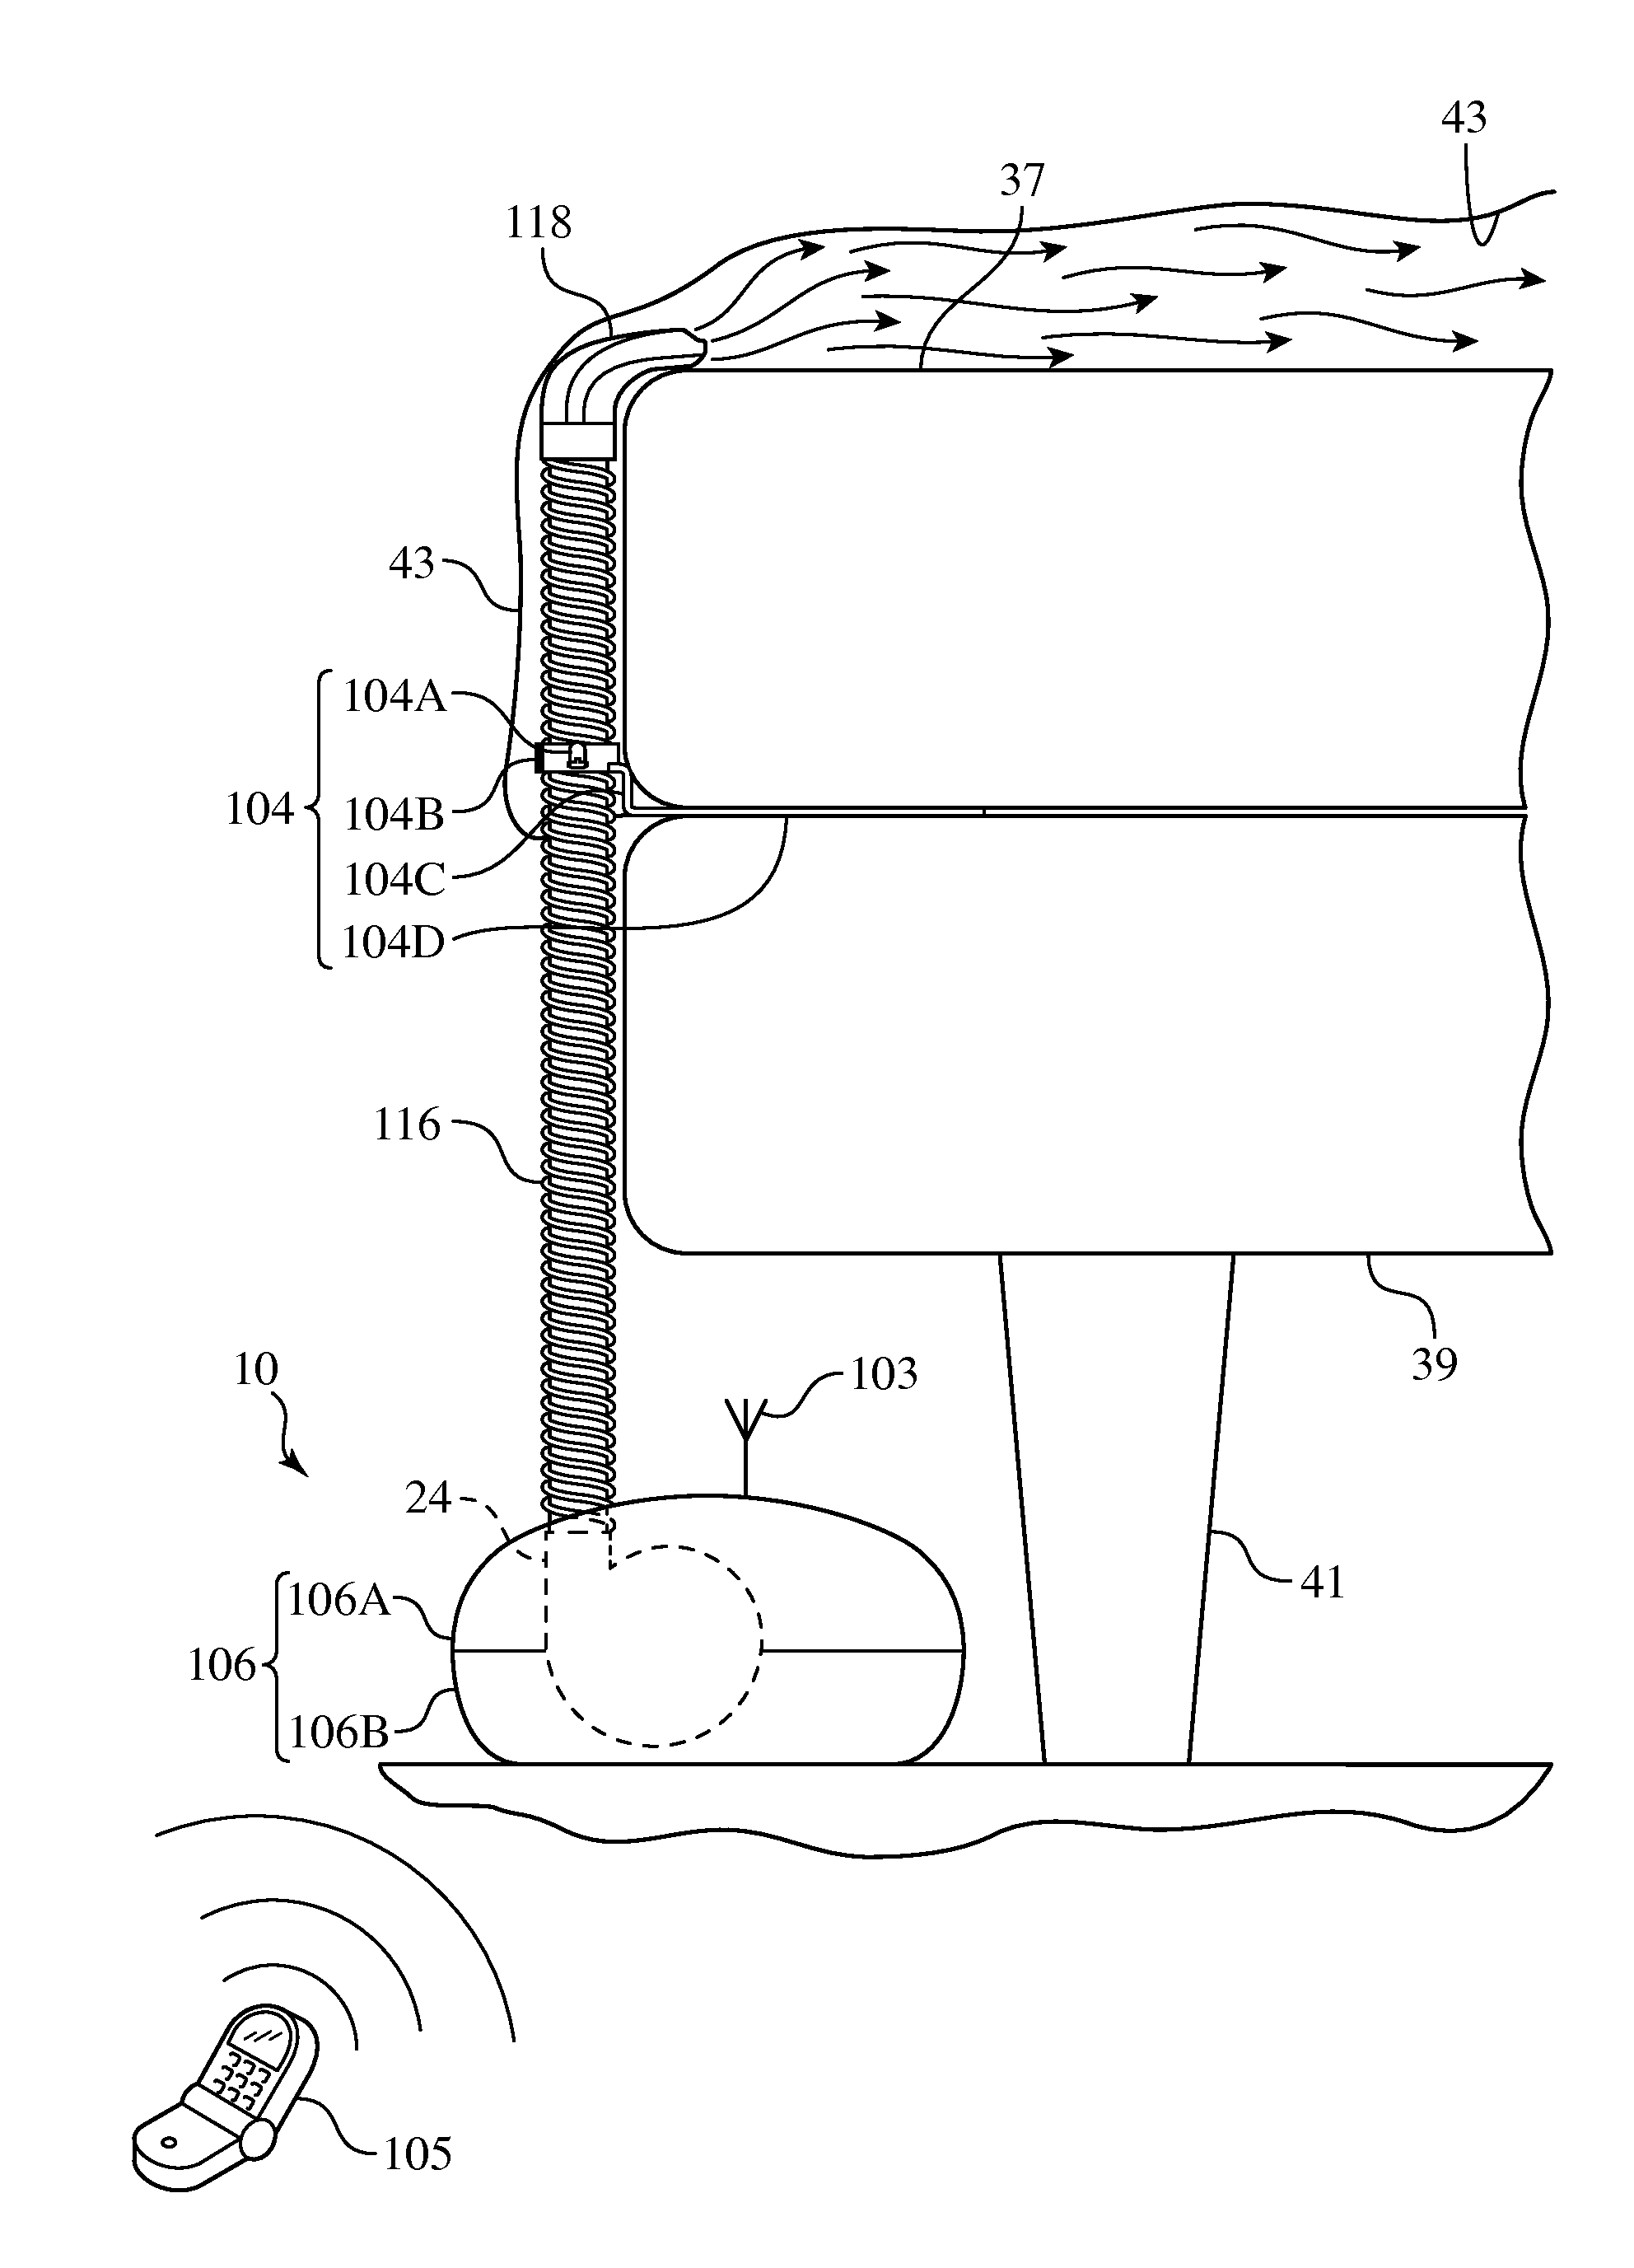 Bedding climate control apparatus with forced airflow for heating and ventilating